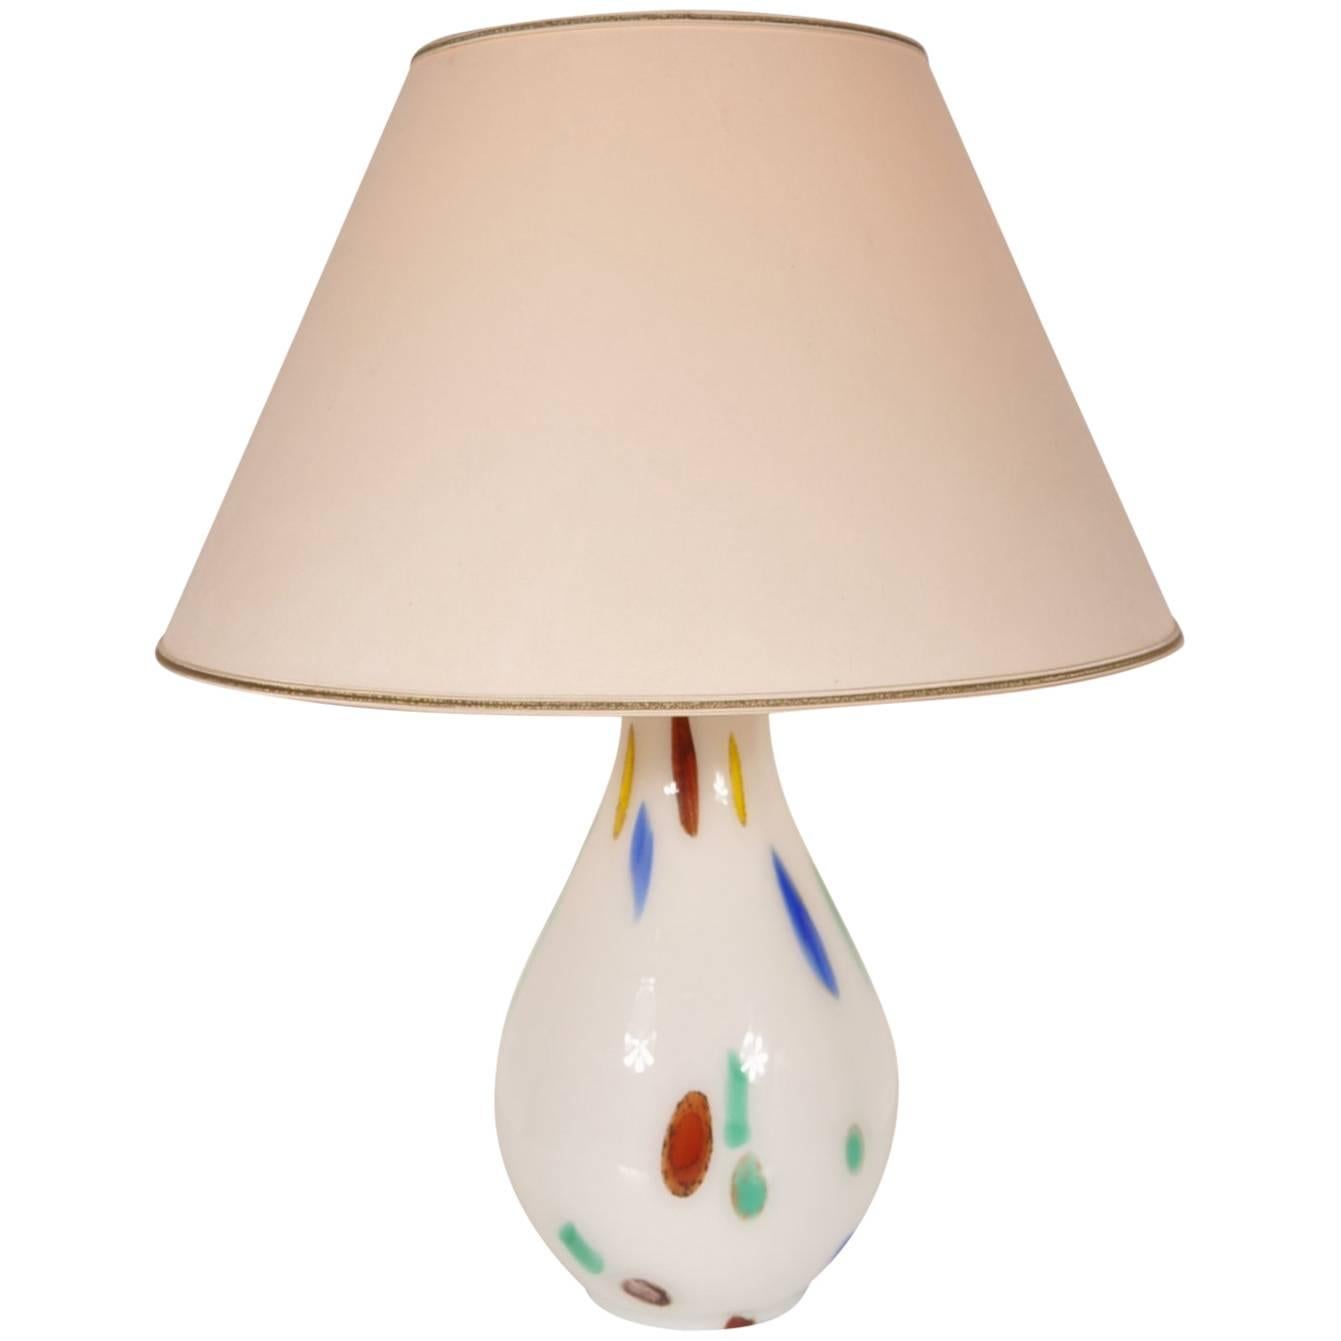 Murano Glass Table Lamp by Dino Martens for Aureliano Toso, Italy, circa 1960 For Sale